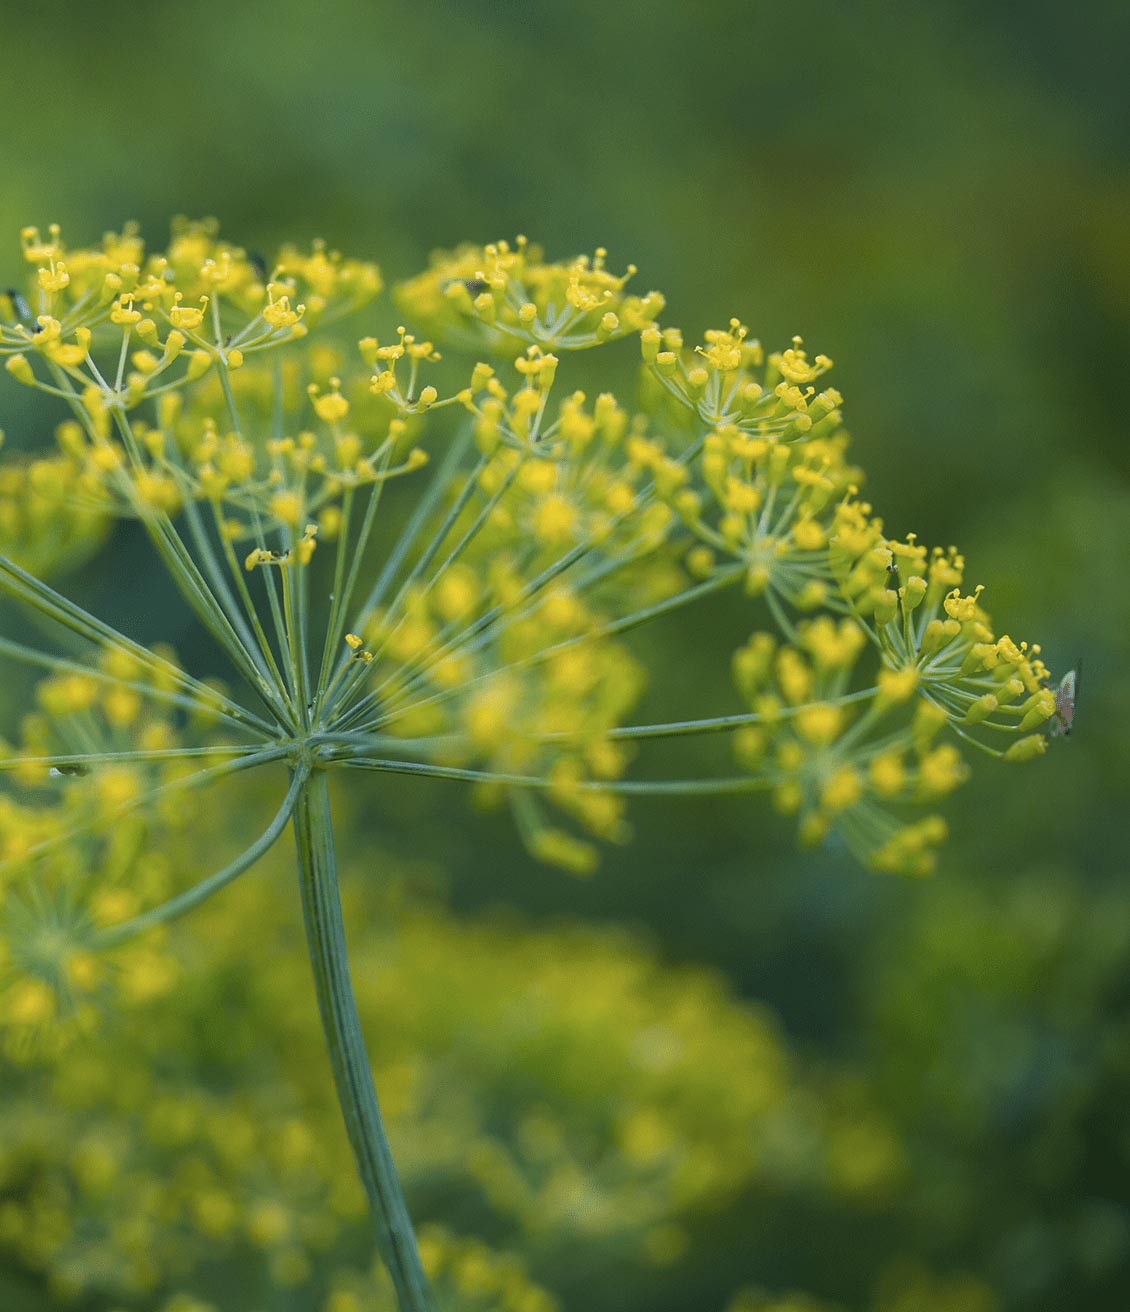 Pretty yellow fennel flowers will soon turn into seeds that will be used in herbal teas